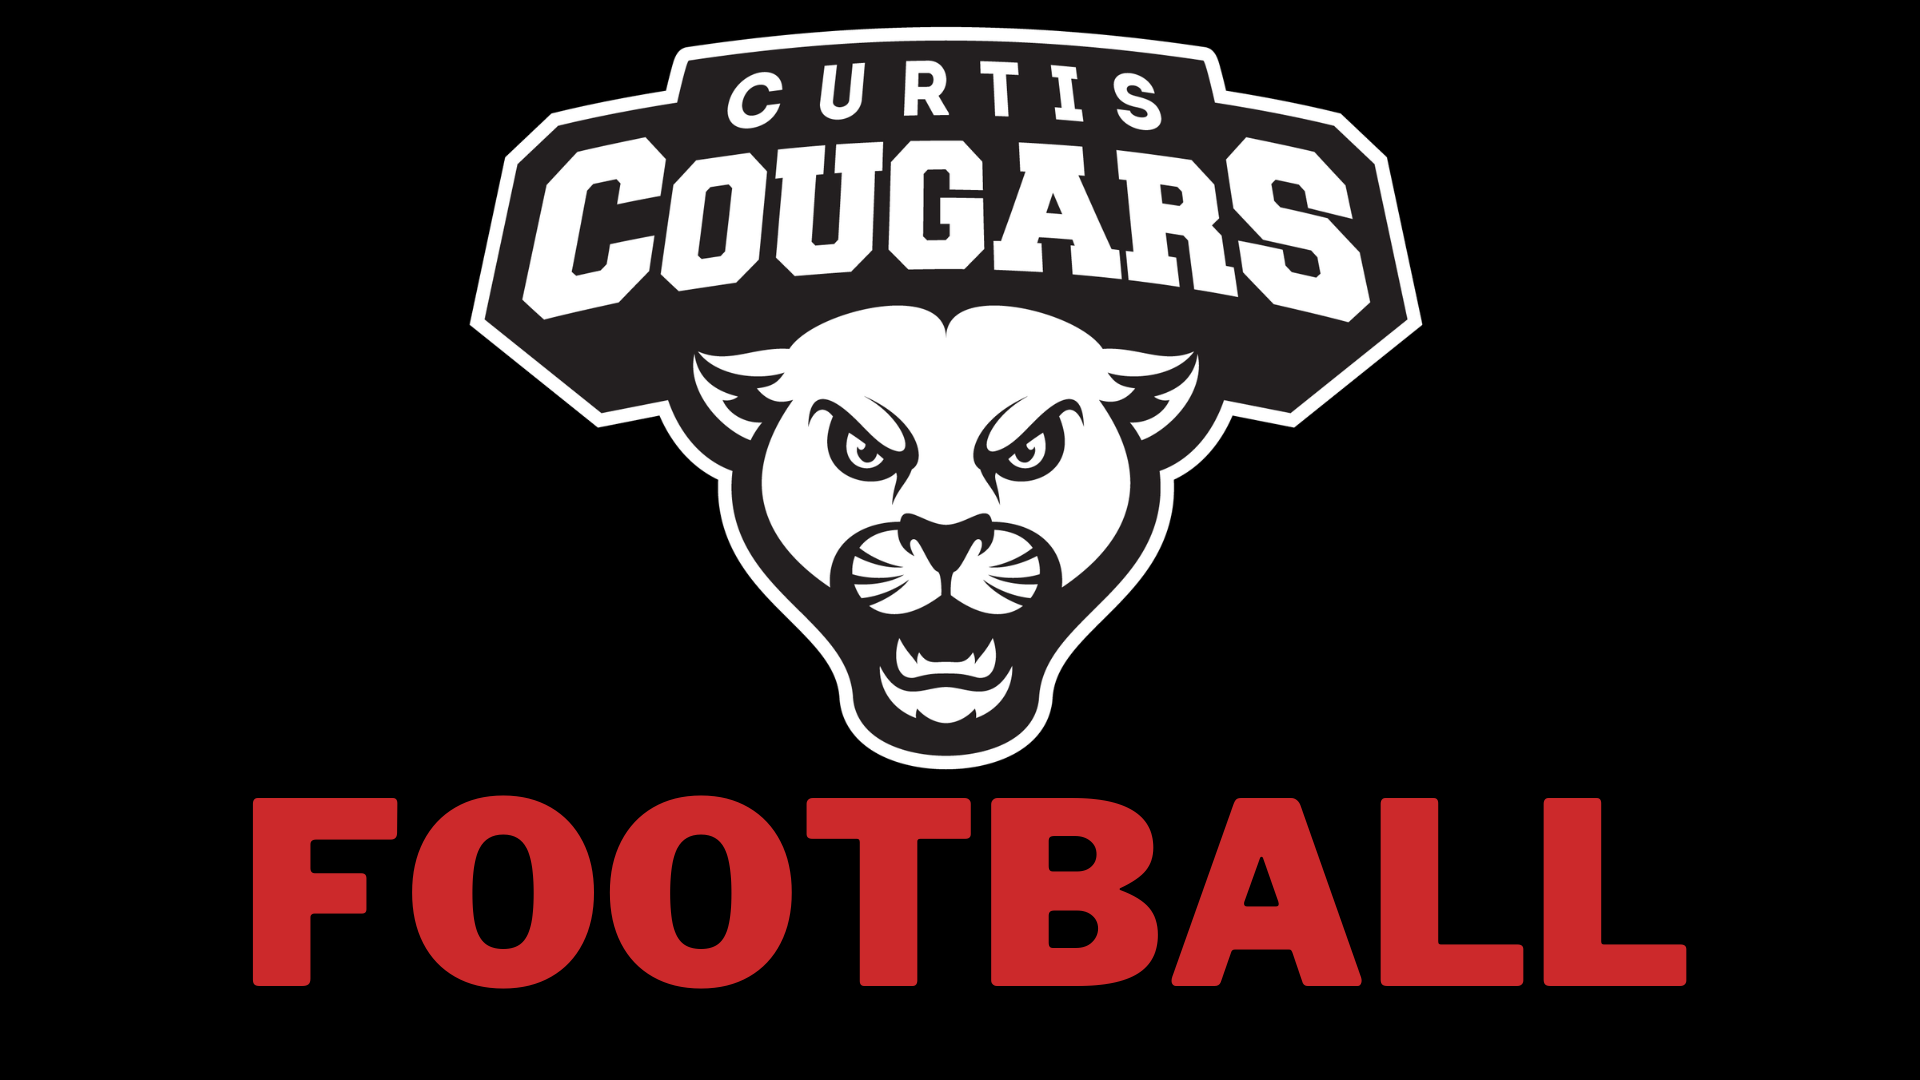 Curtis Cougars Football